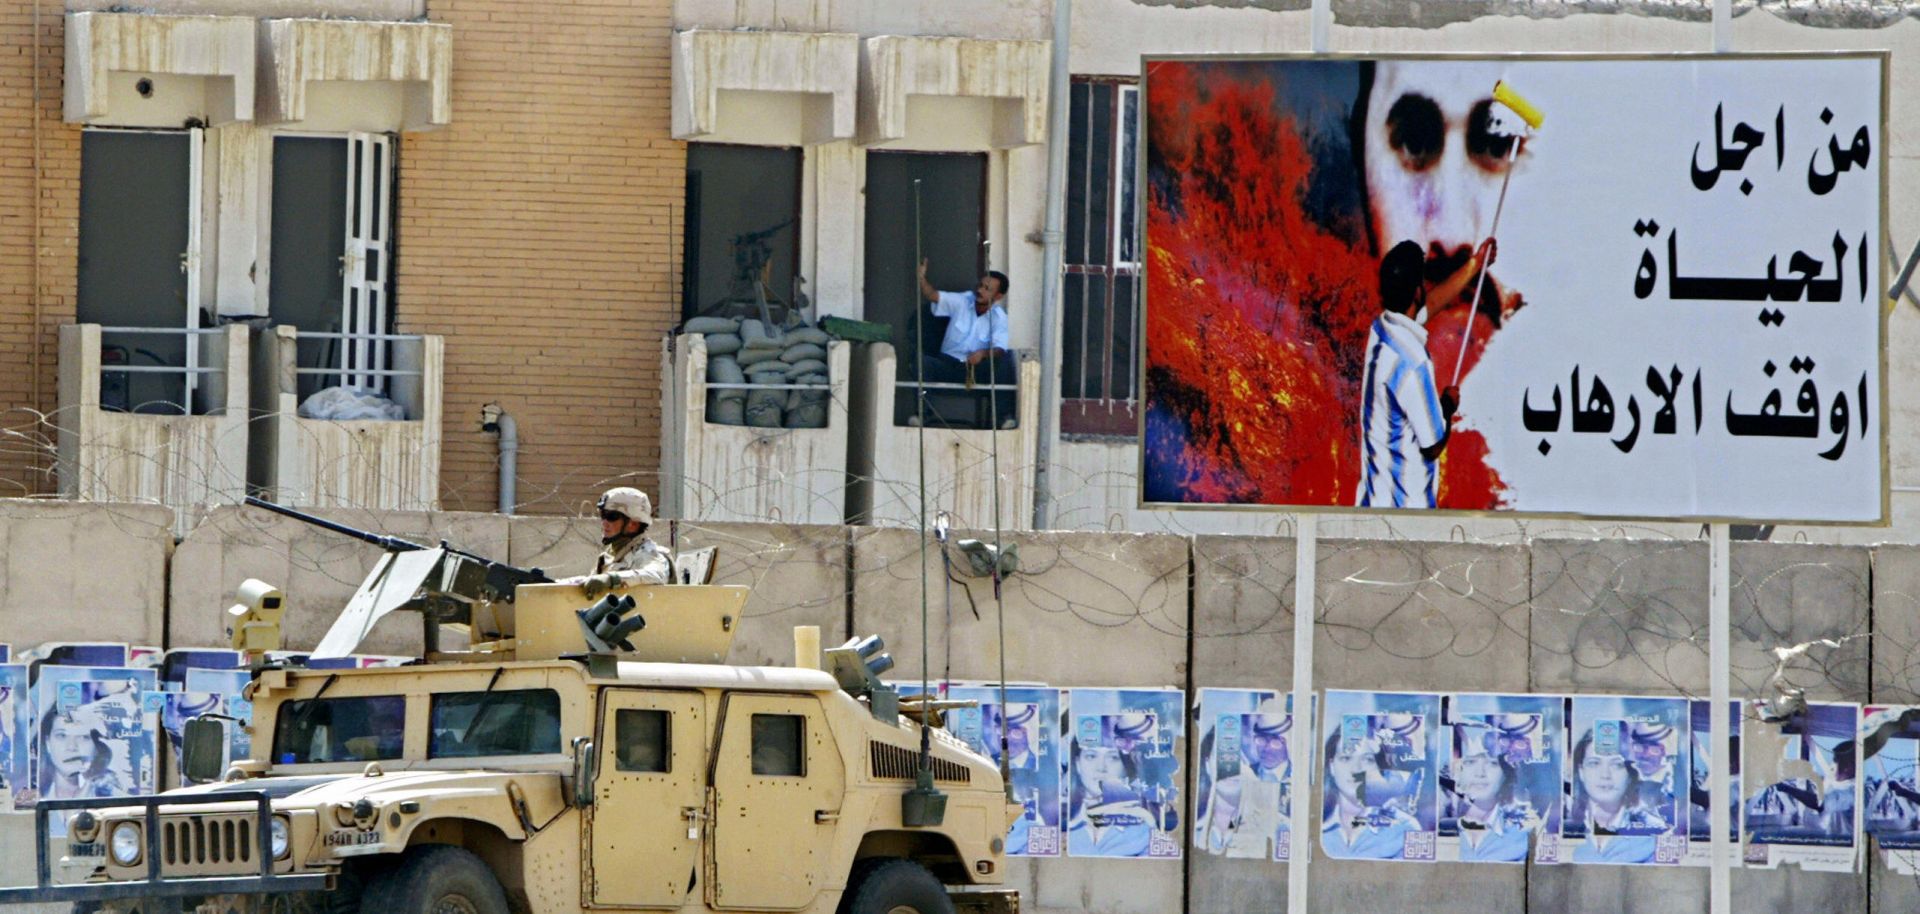 A U.S. Humvee passes a billboard showing the portrait of al Qaeda in Iraq leader Abu Musab al-Zarqawi in Baghdad on Oct. 8, 2005, a day after U.S. officials said they seized a letter allegedly sent to al-Zarqawi by al Qaeda No. 2 Ayman al-Zawahiri, in which he raised concerns over the impact on Arab opinion of videotaped executions.